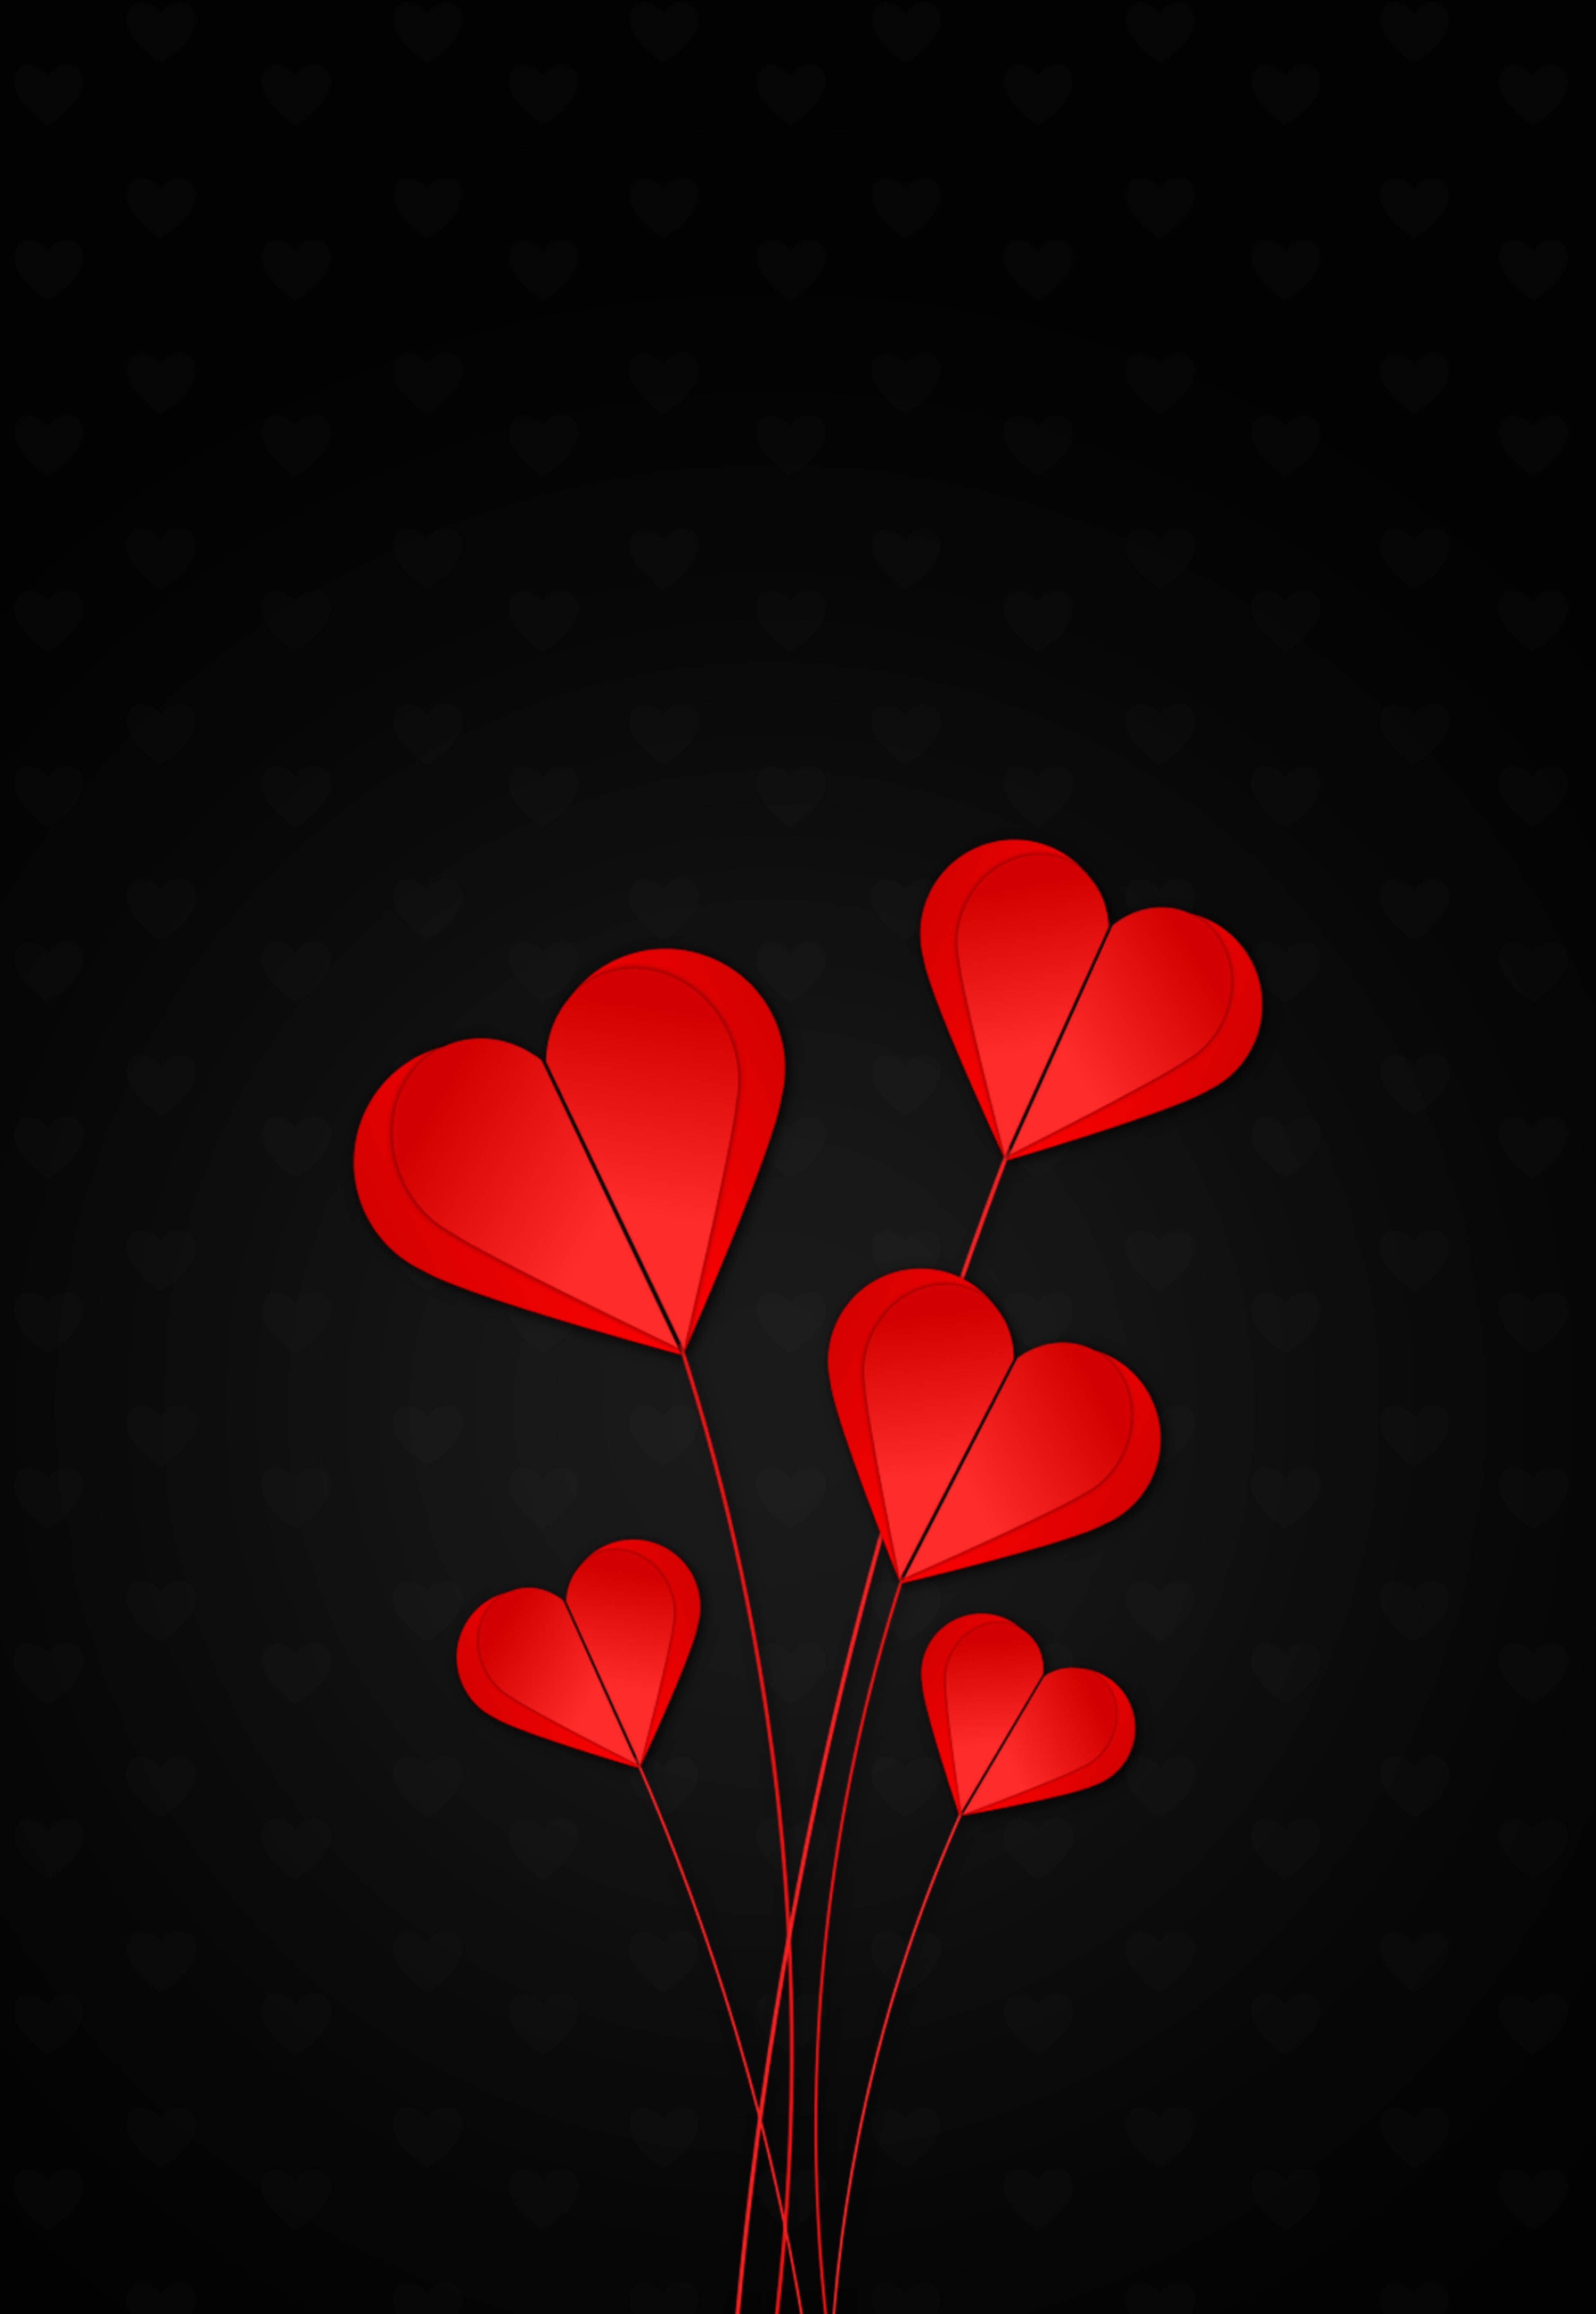 hearts, black background, love, red phone wallpaper